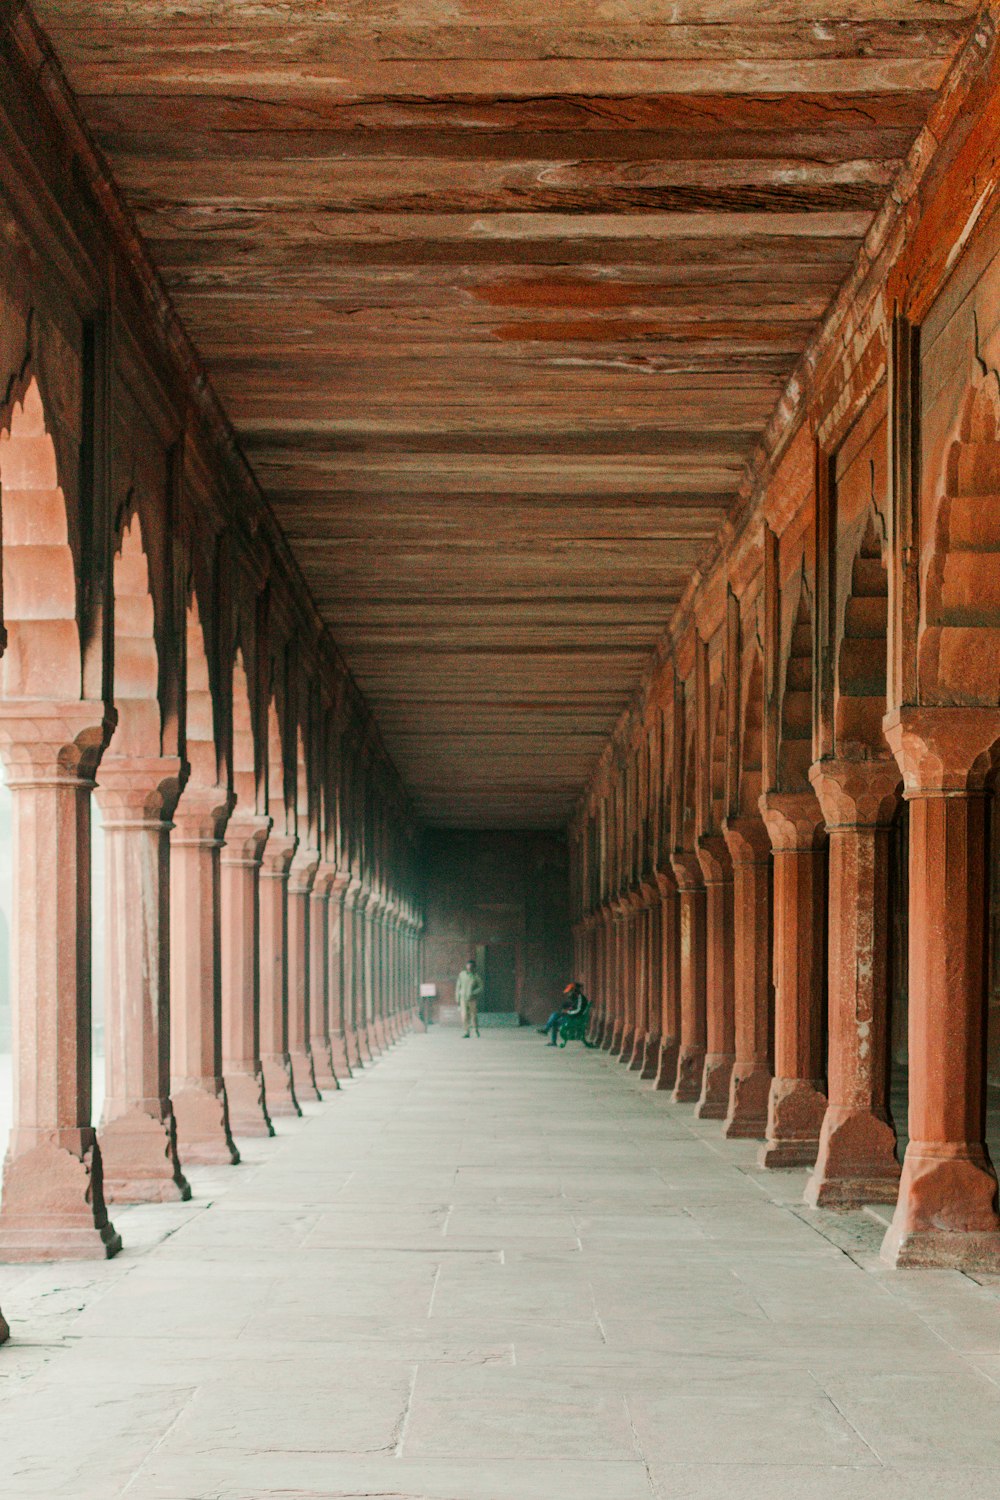 a long hallway with columns and a person sitting on a bench